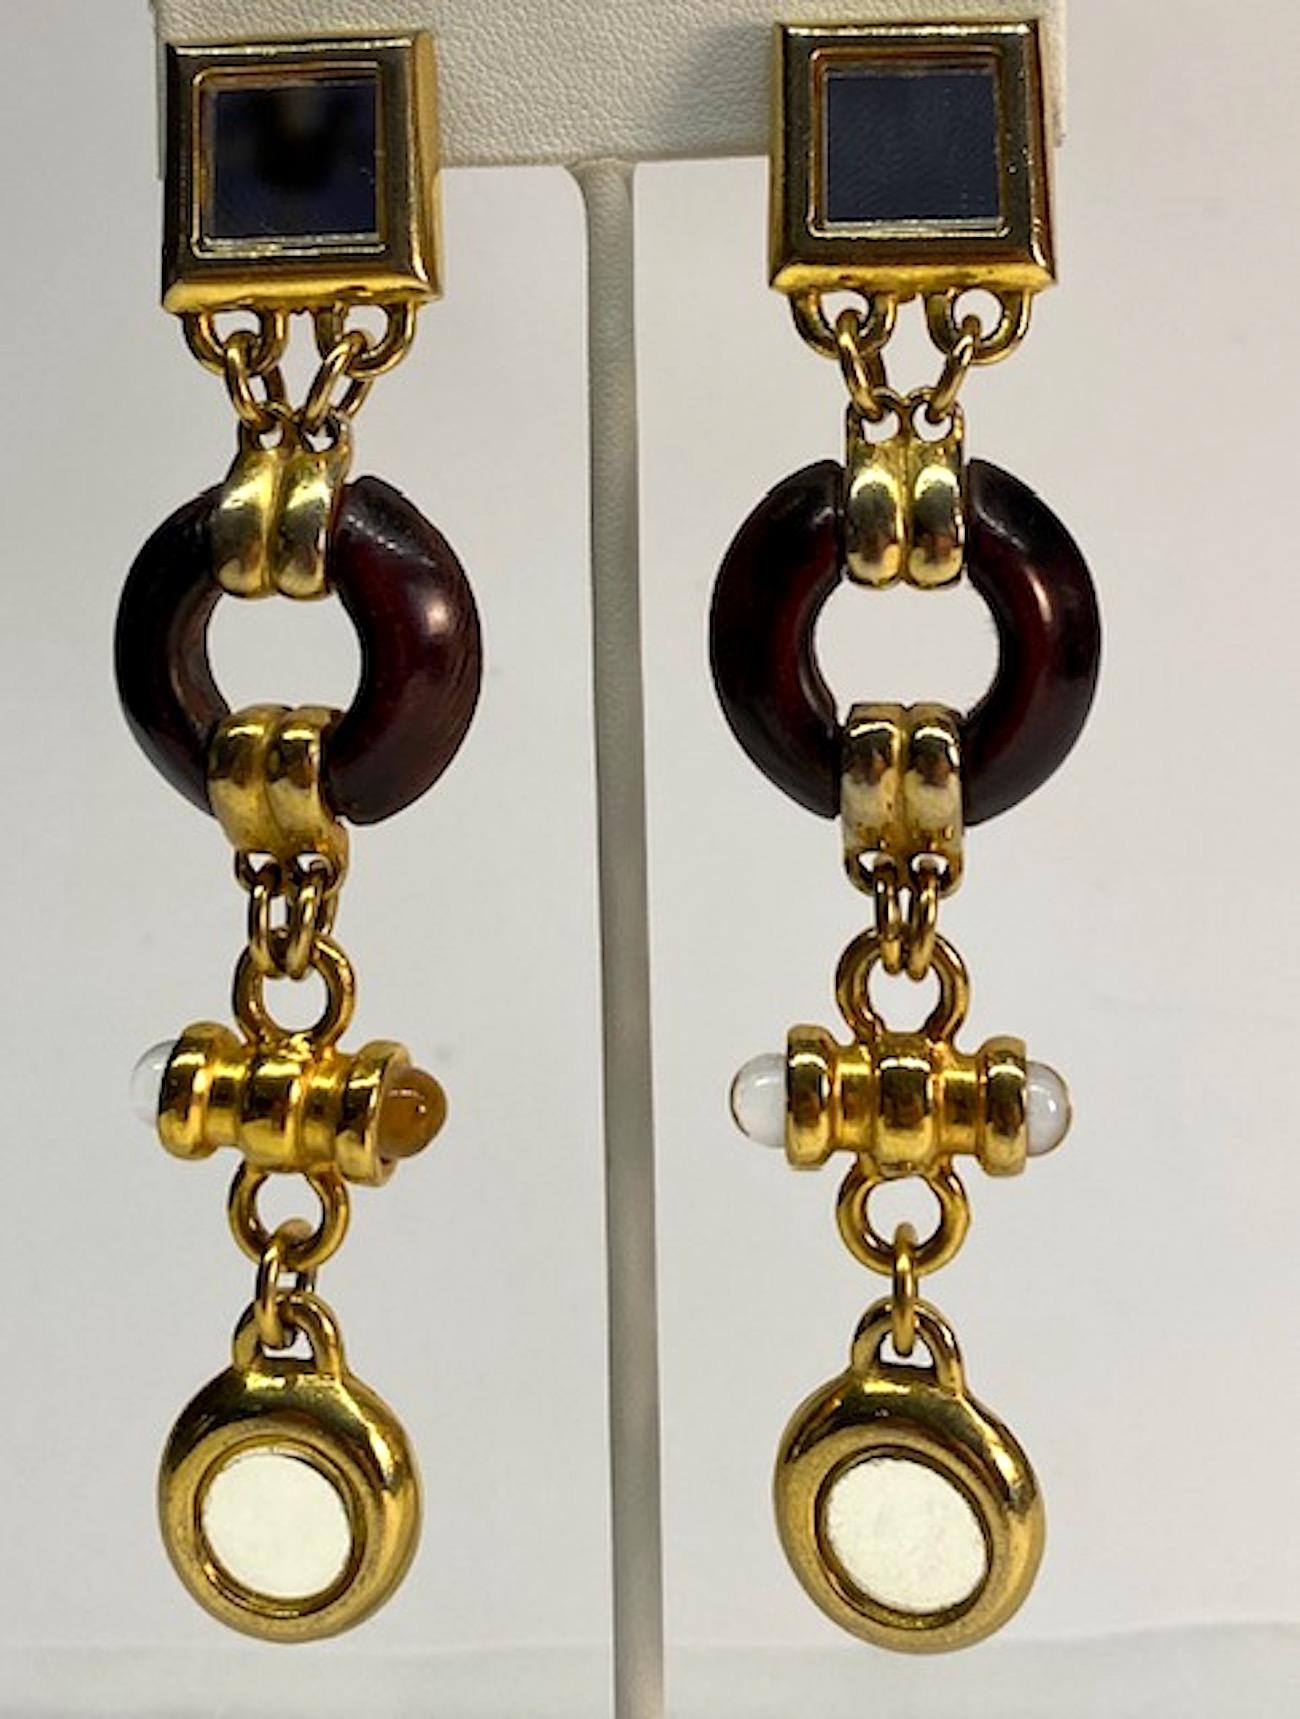 A striking pair of long pendant earrings by French designer Claire Deve. The earrings not only have mirror glass pieces in the gold tone setting, but also a wood ring and glass bead accents. A wonderful combination of materials beautifully